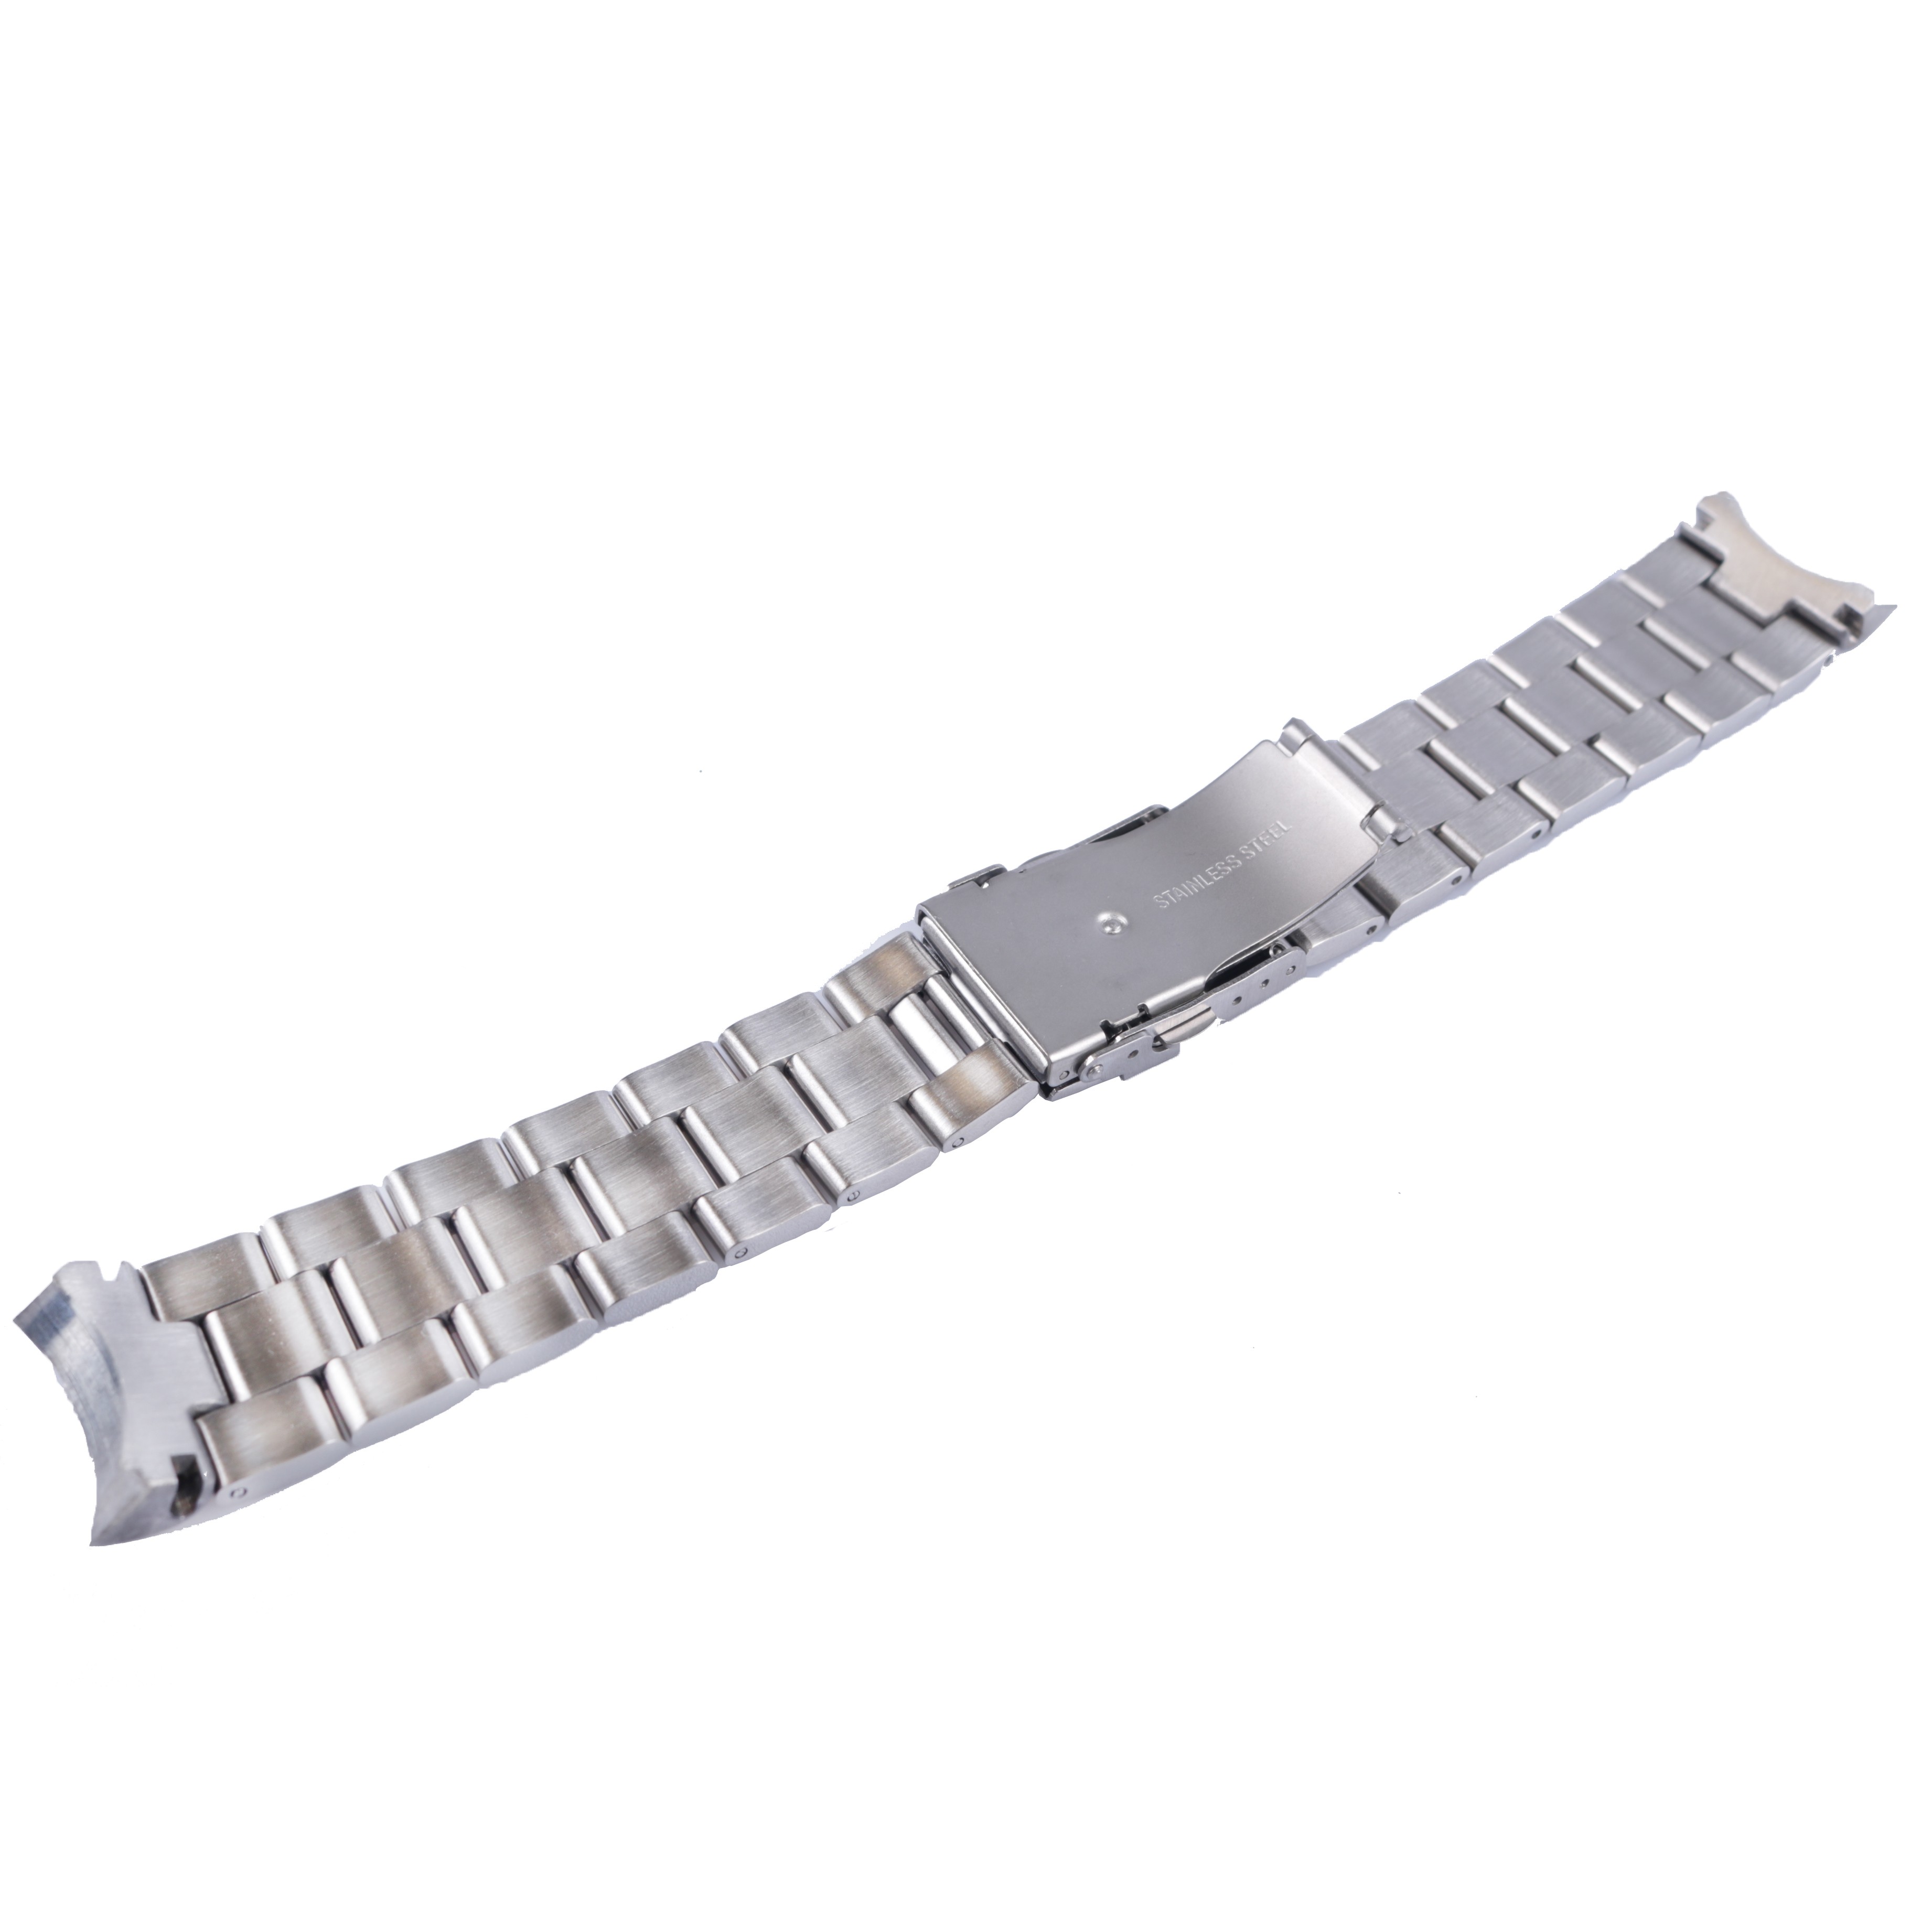 Rolamy - Metal watch band, 22mm, silver, stainless steel, double push clasp for Seiko